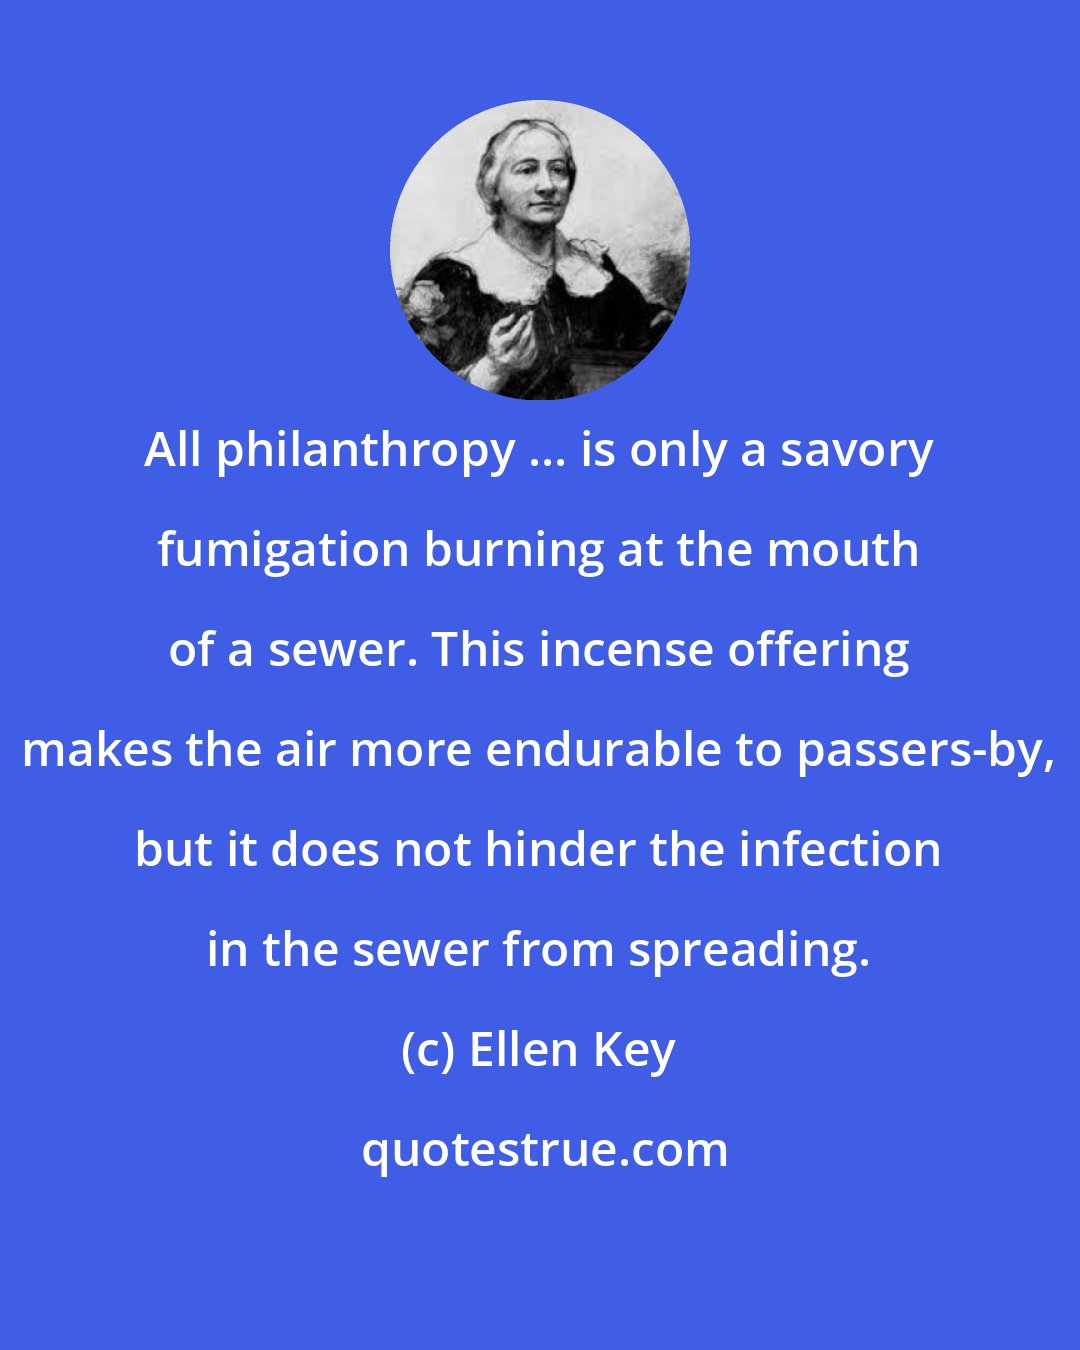 Ellen Key: All philanthropy ... is only a savory fumigation burning at the mouth of a sewer. This incense offering makes the air more endurable to passers-by, but it does not hinder the infection in the sewer from spreading.